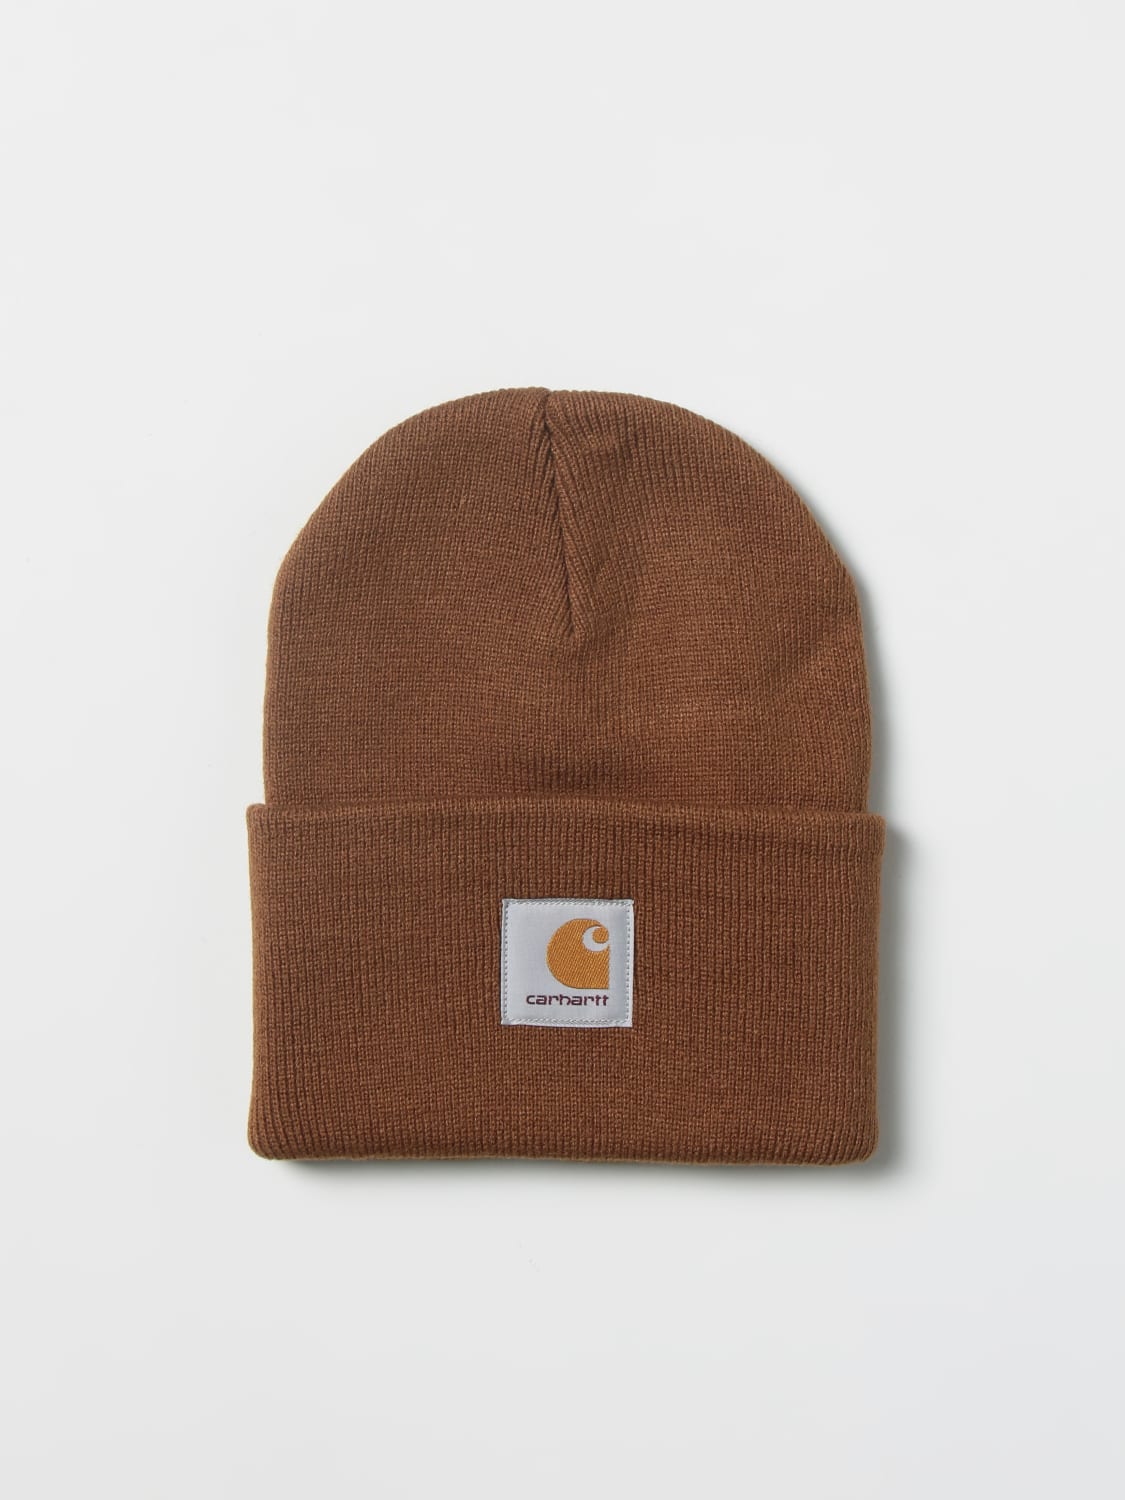 Carhartt Wip Outlet: Cappello Carhartt in maglia a costine - Marrone